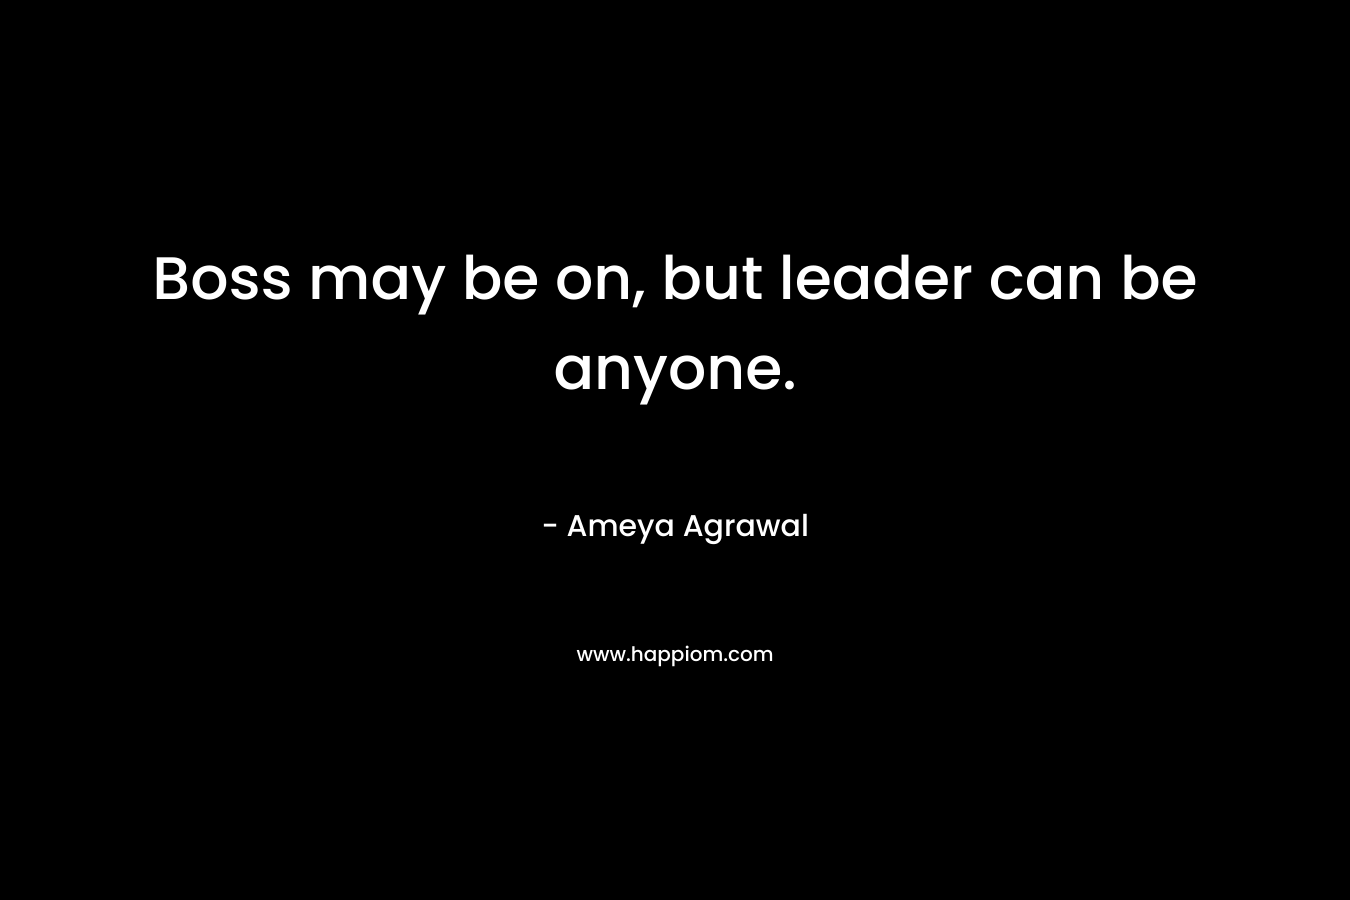 Boss may be on, but leader can be anyone. – Ameya Agrawal